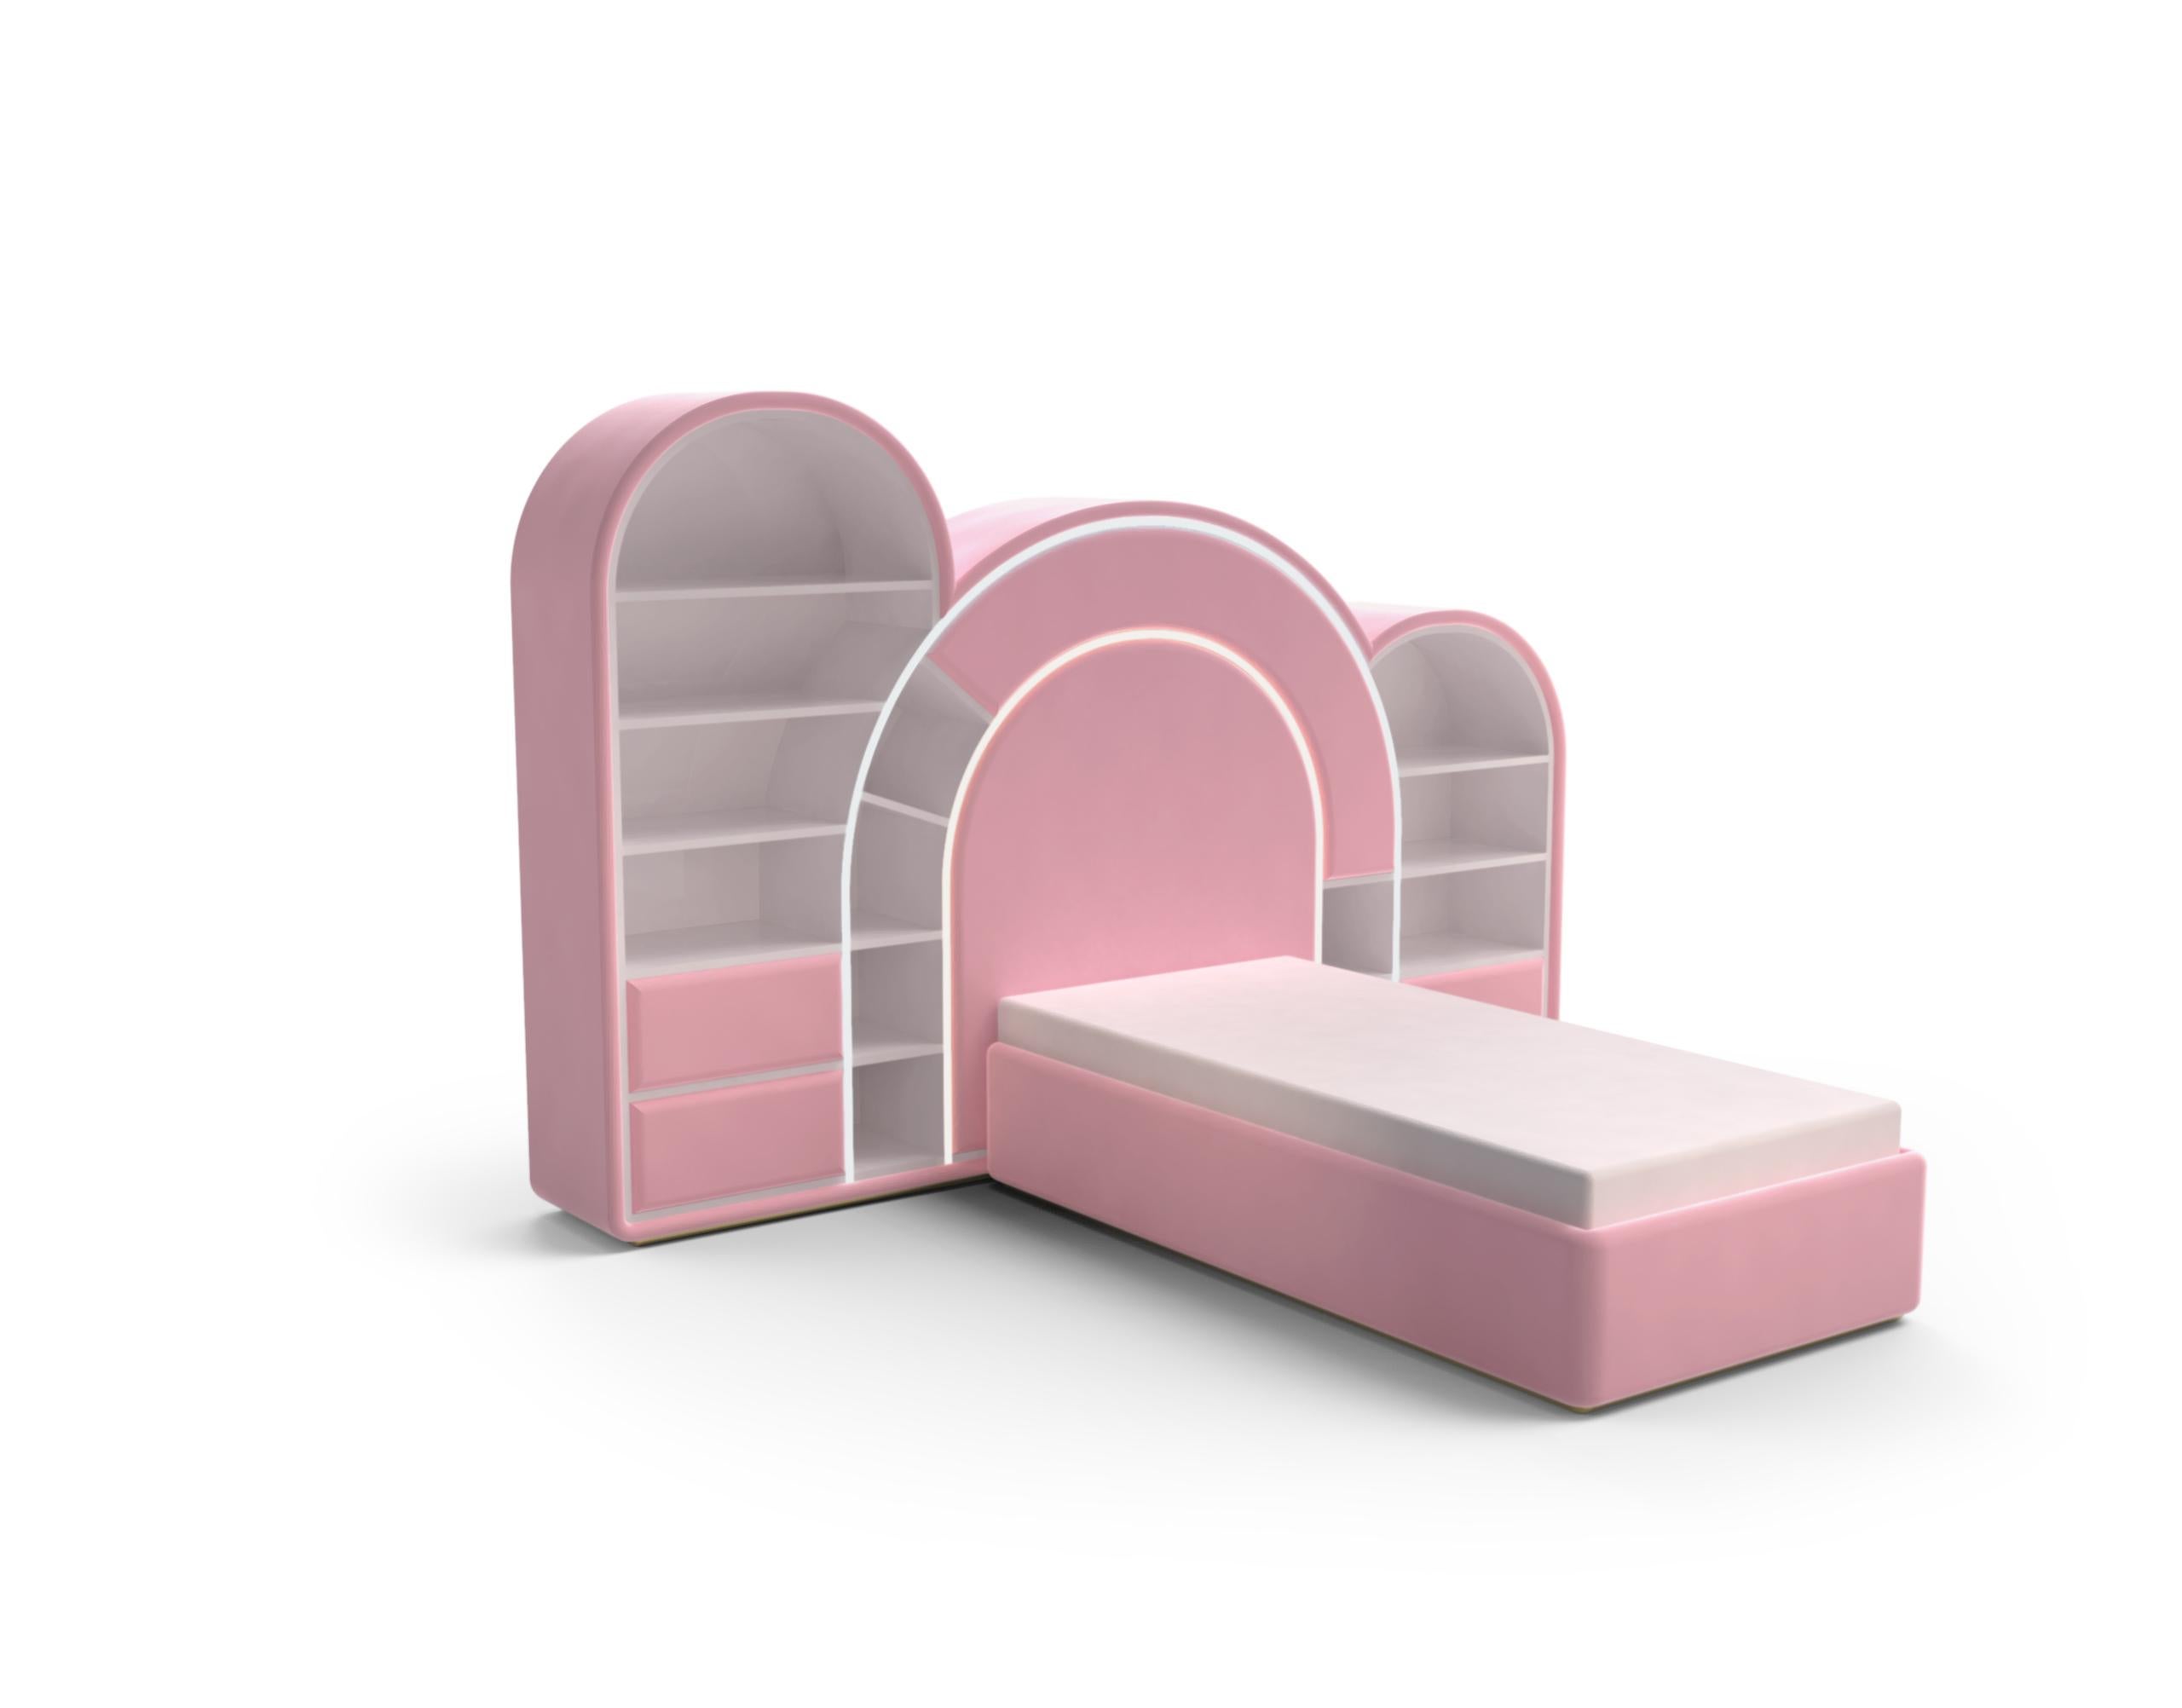 Bubble Gum Kids Bed in Velvet and LED Light by Circu Magical Furniture

Inspired by the sweetness of kids' favorite candies the Bubble Gum Bed is going to take you directly to wonderland.
With its curved shapes combined with LED features, this